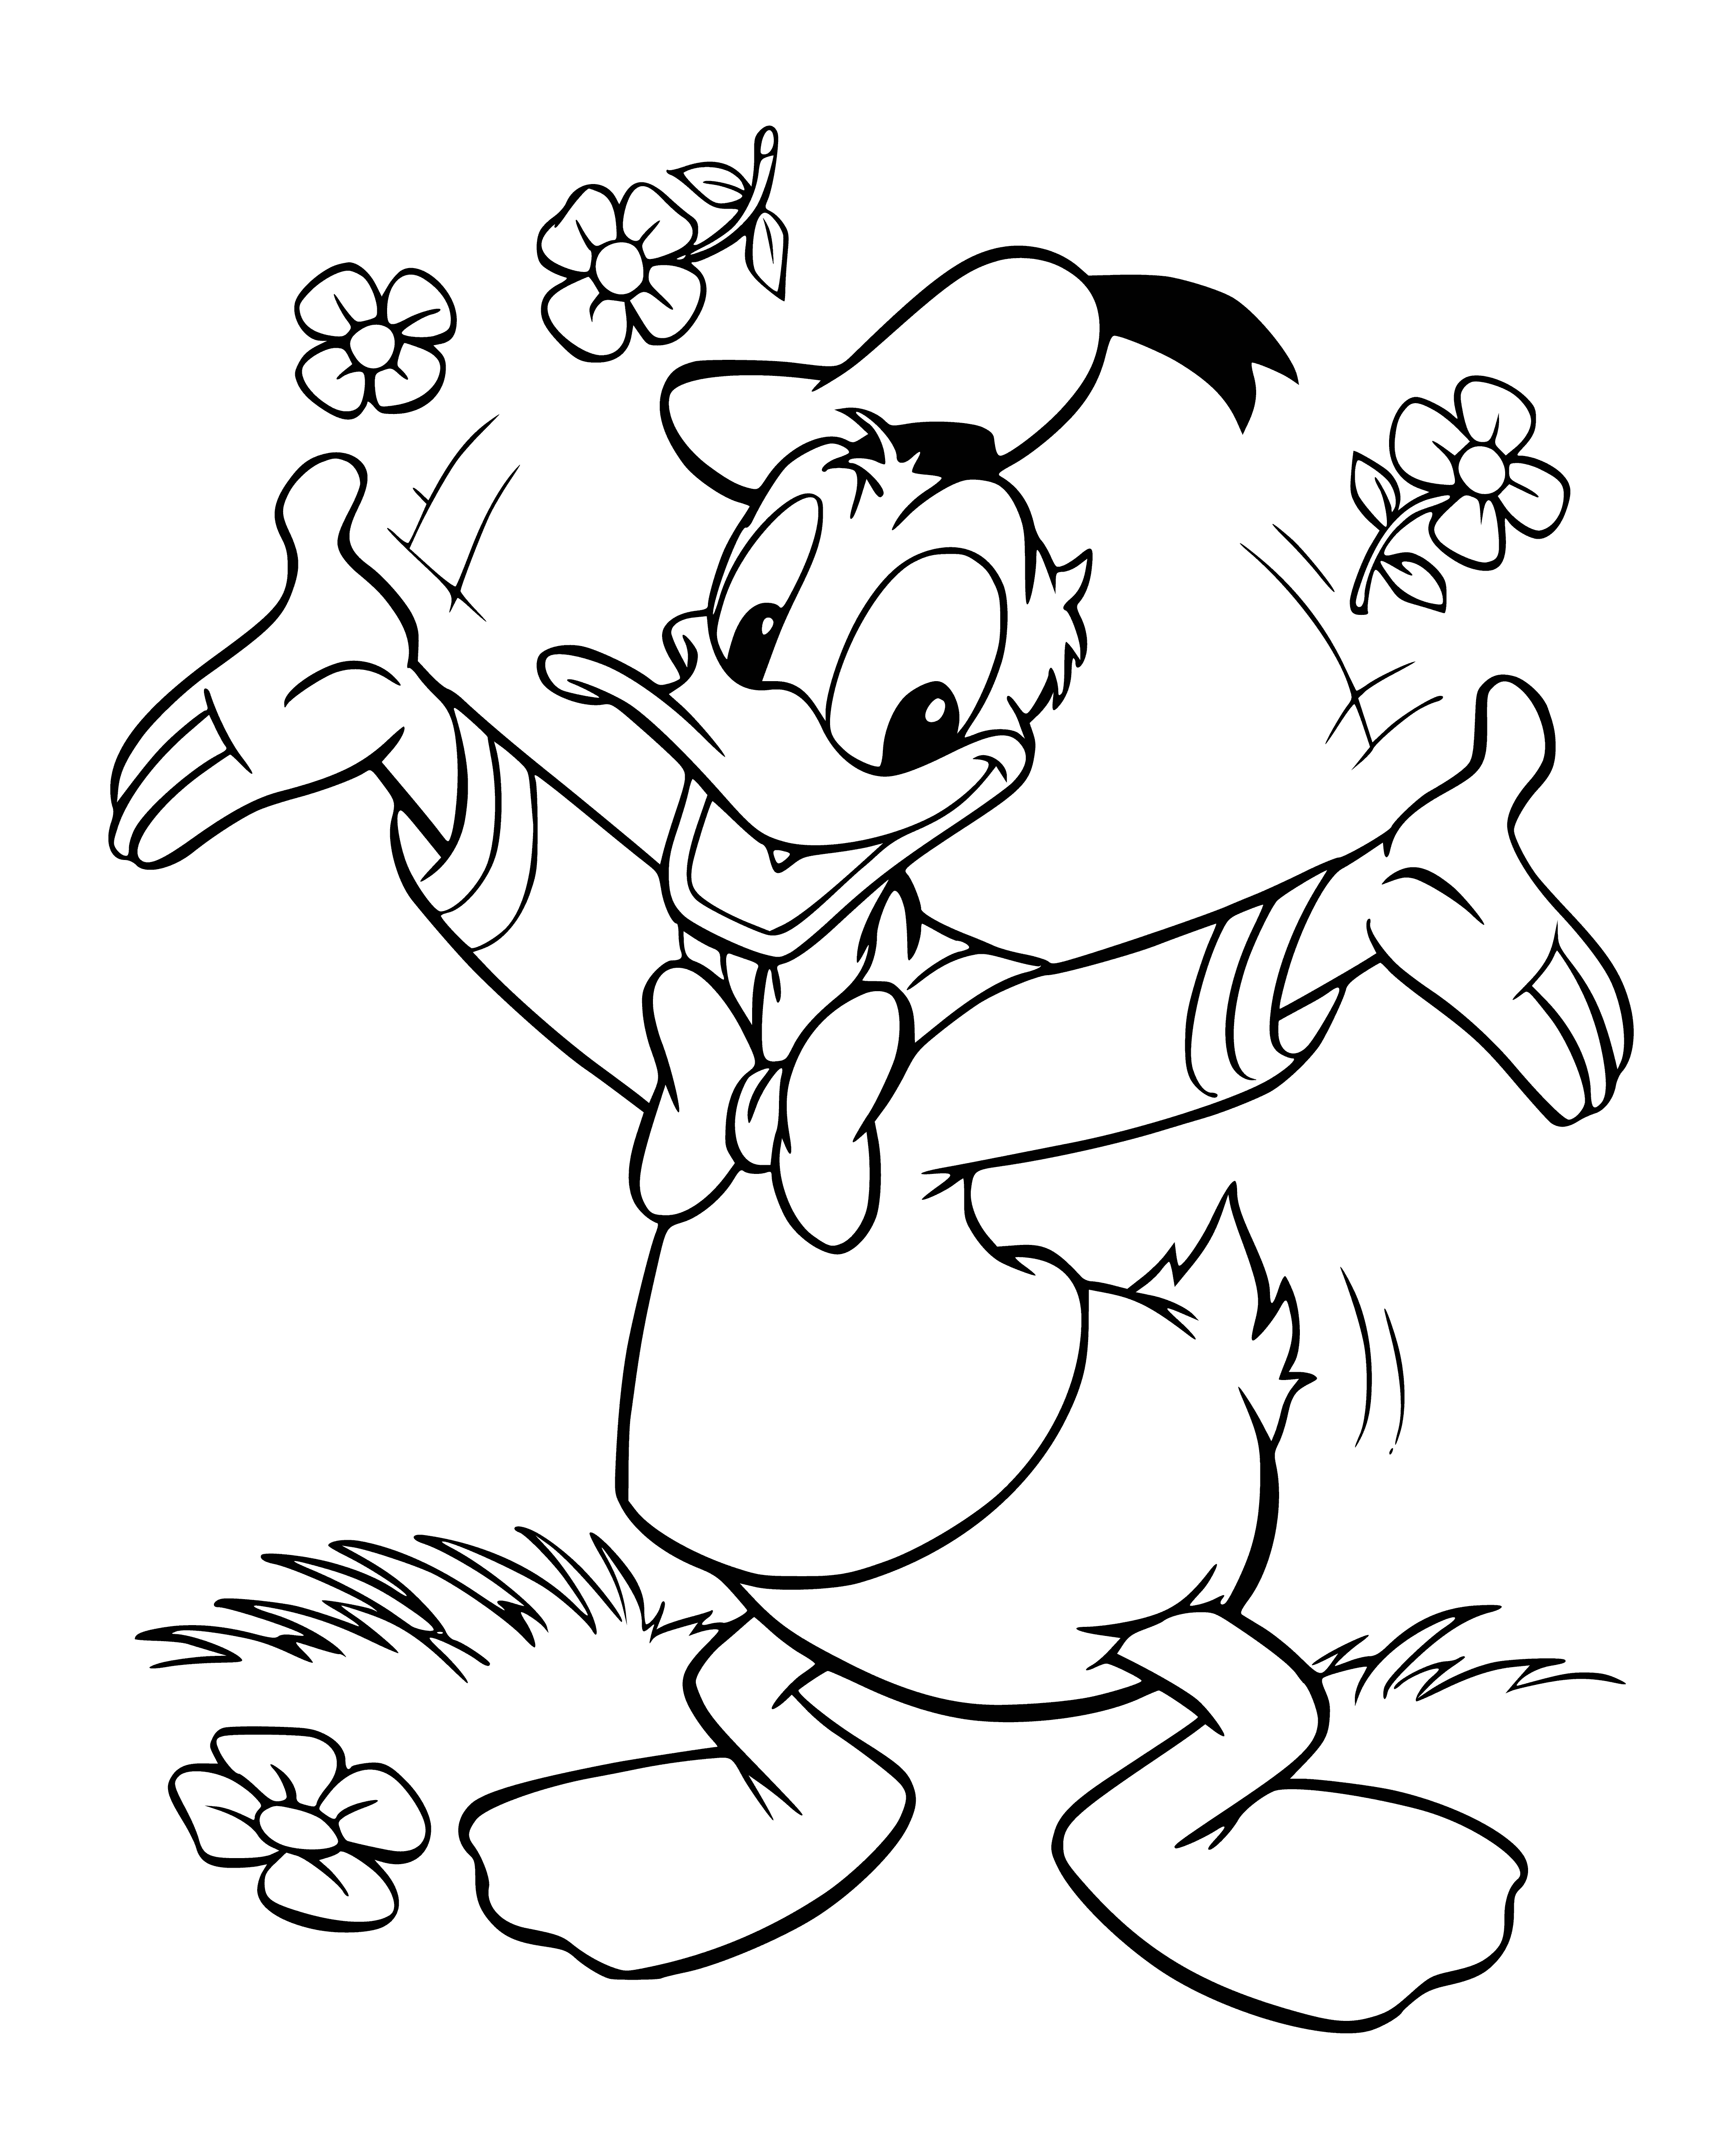 coloring page: Donald Duck is a cartoon character renowned for his speech, temper & polka dotted feet wearing a sailor shirt & cap with a bow tie.